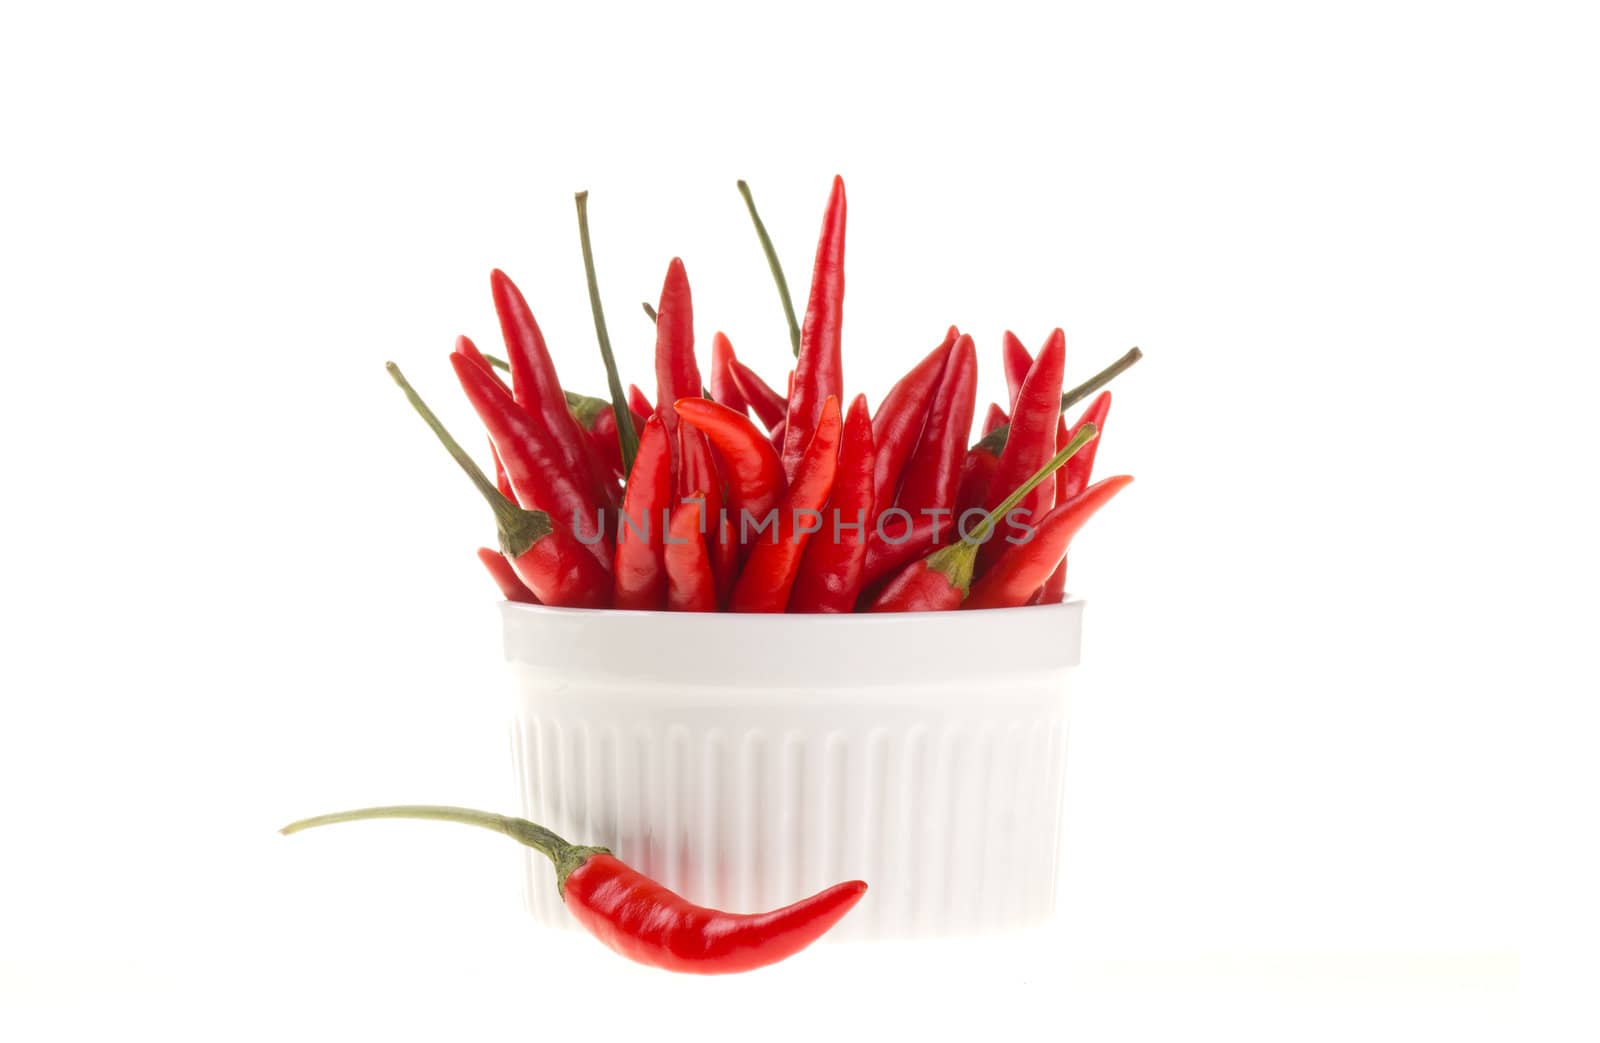 Red chili by tehcheesiong